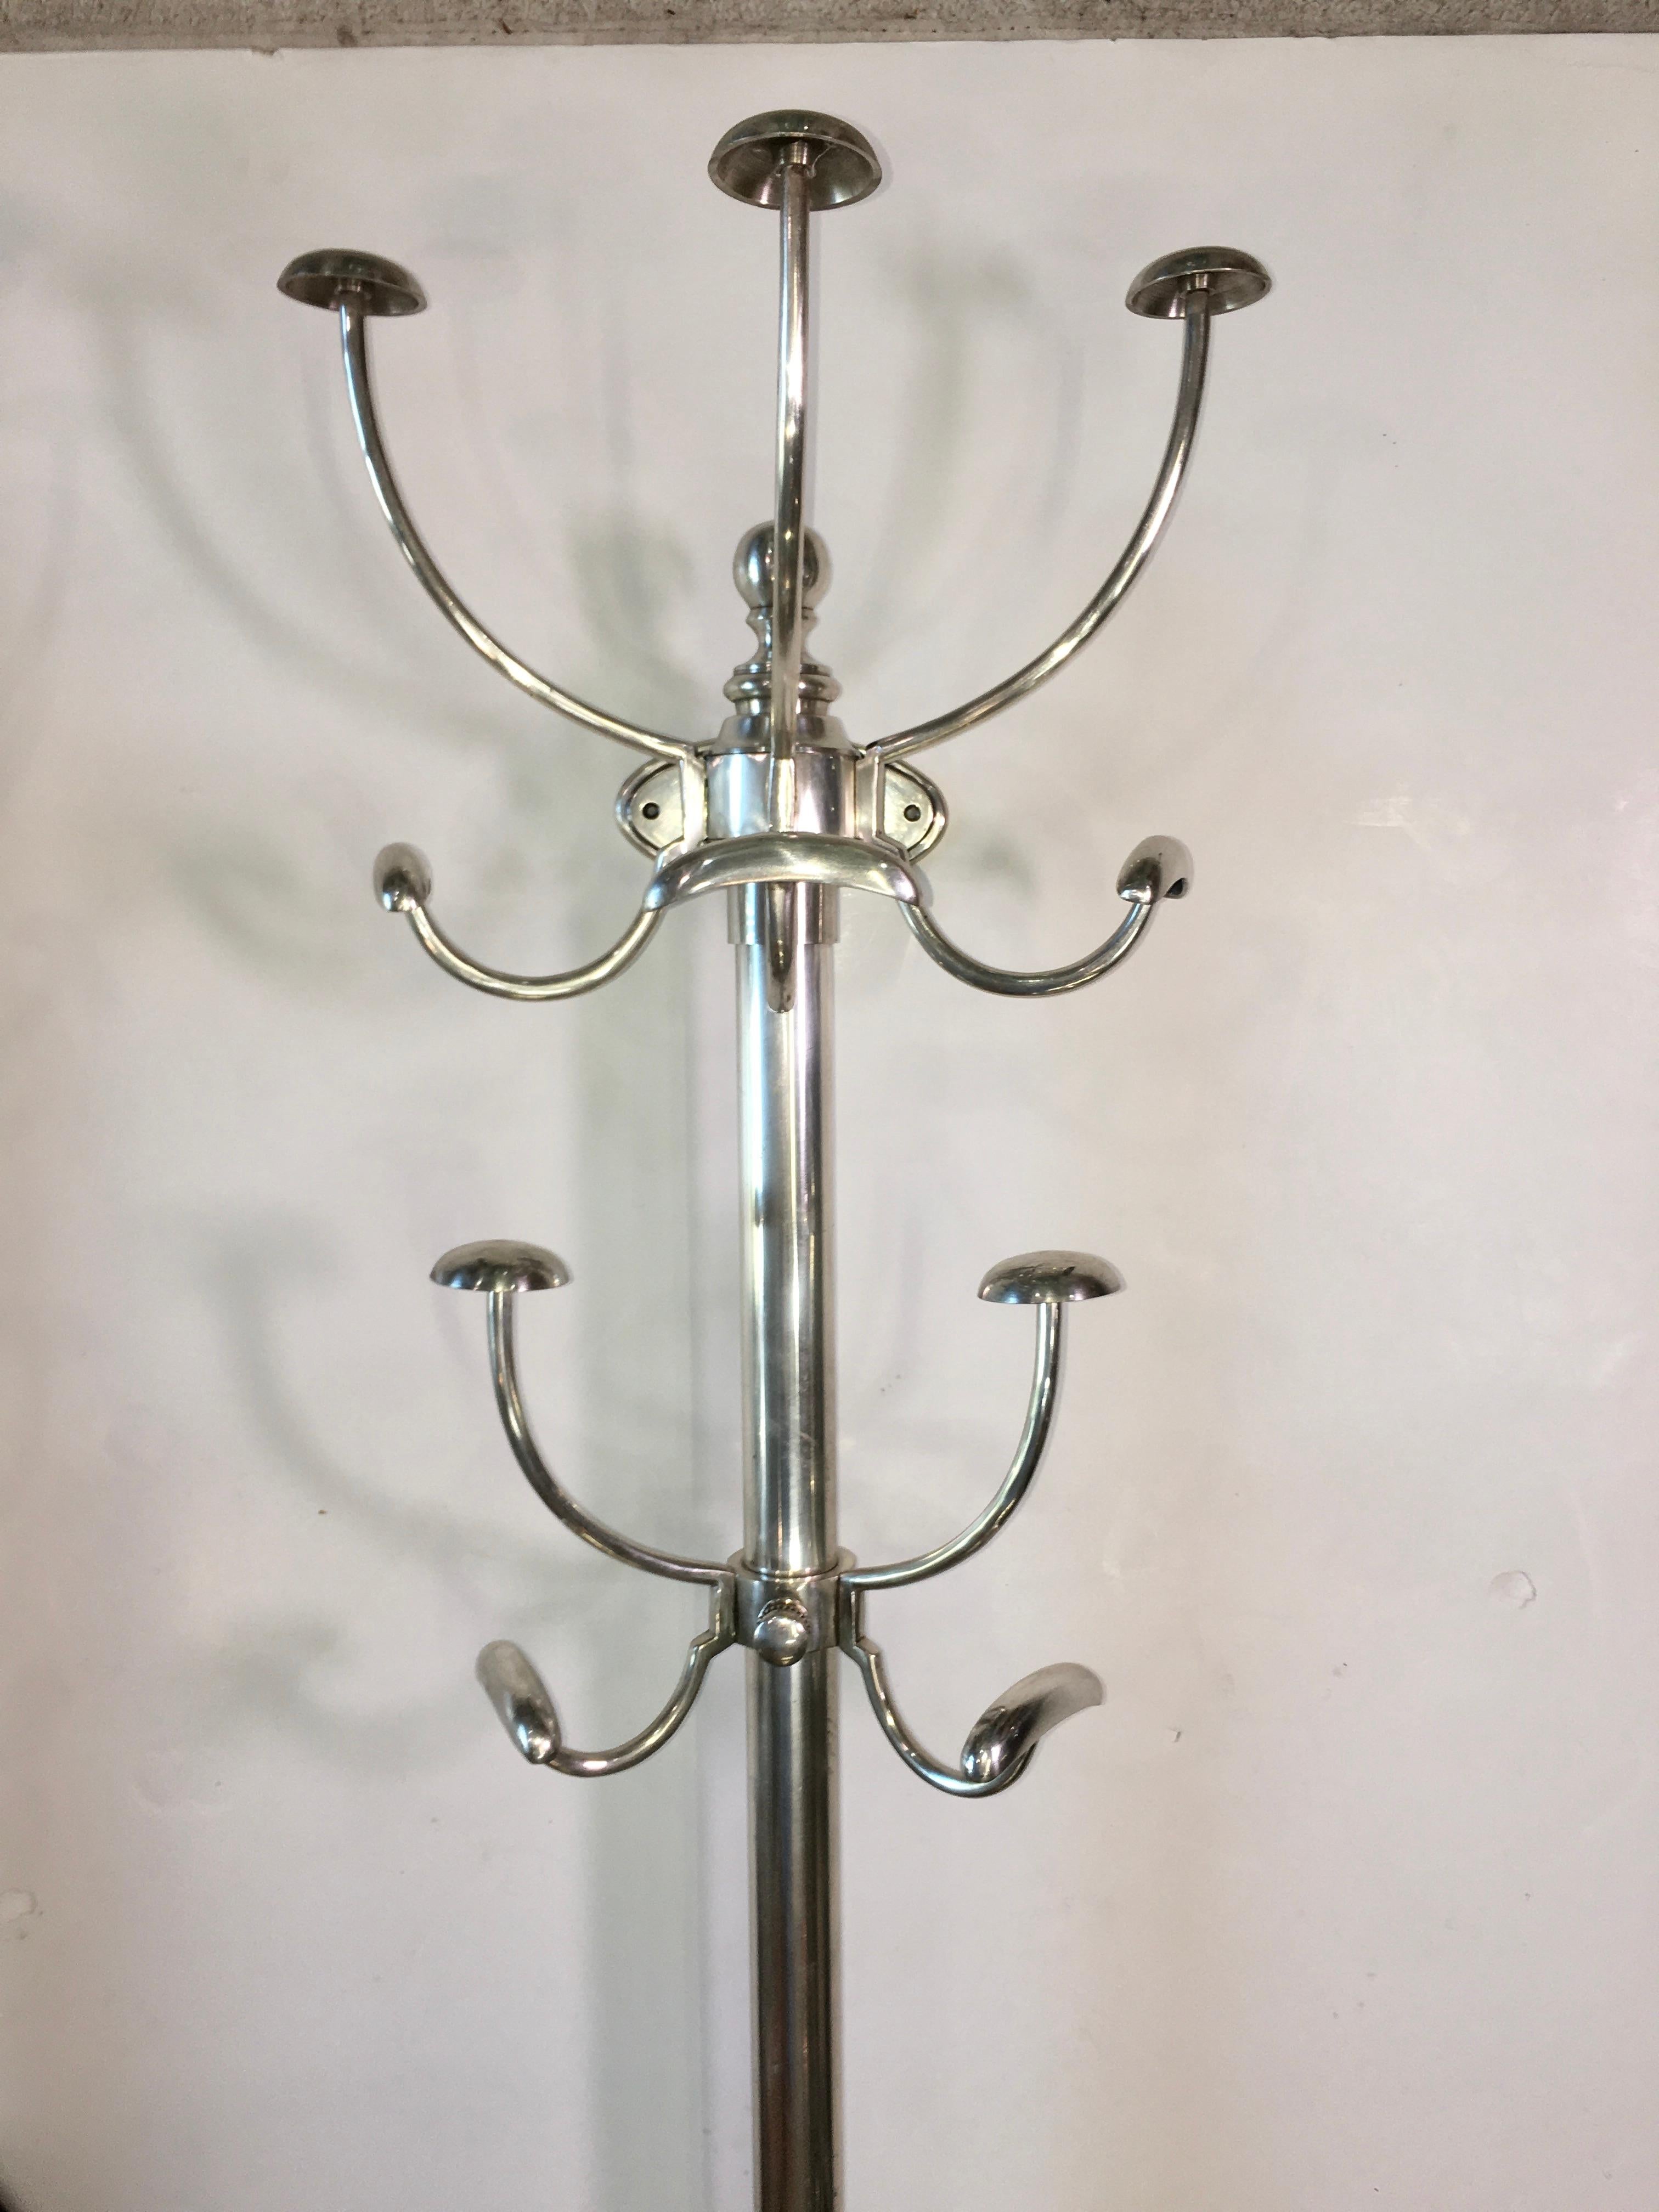 A pair of vintage metal french coat/hat hooks wall mounted interior design architectural salvage